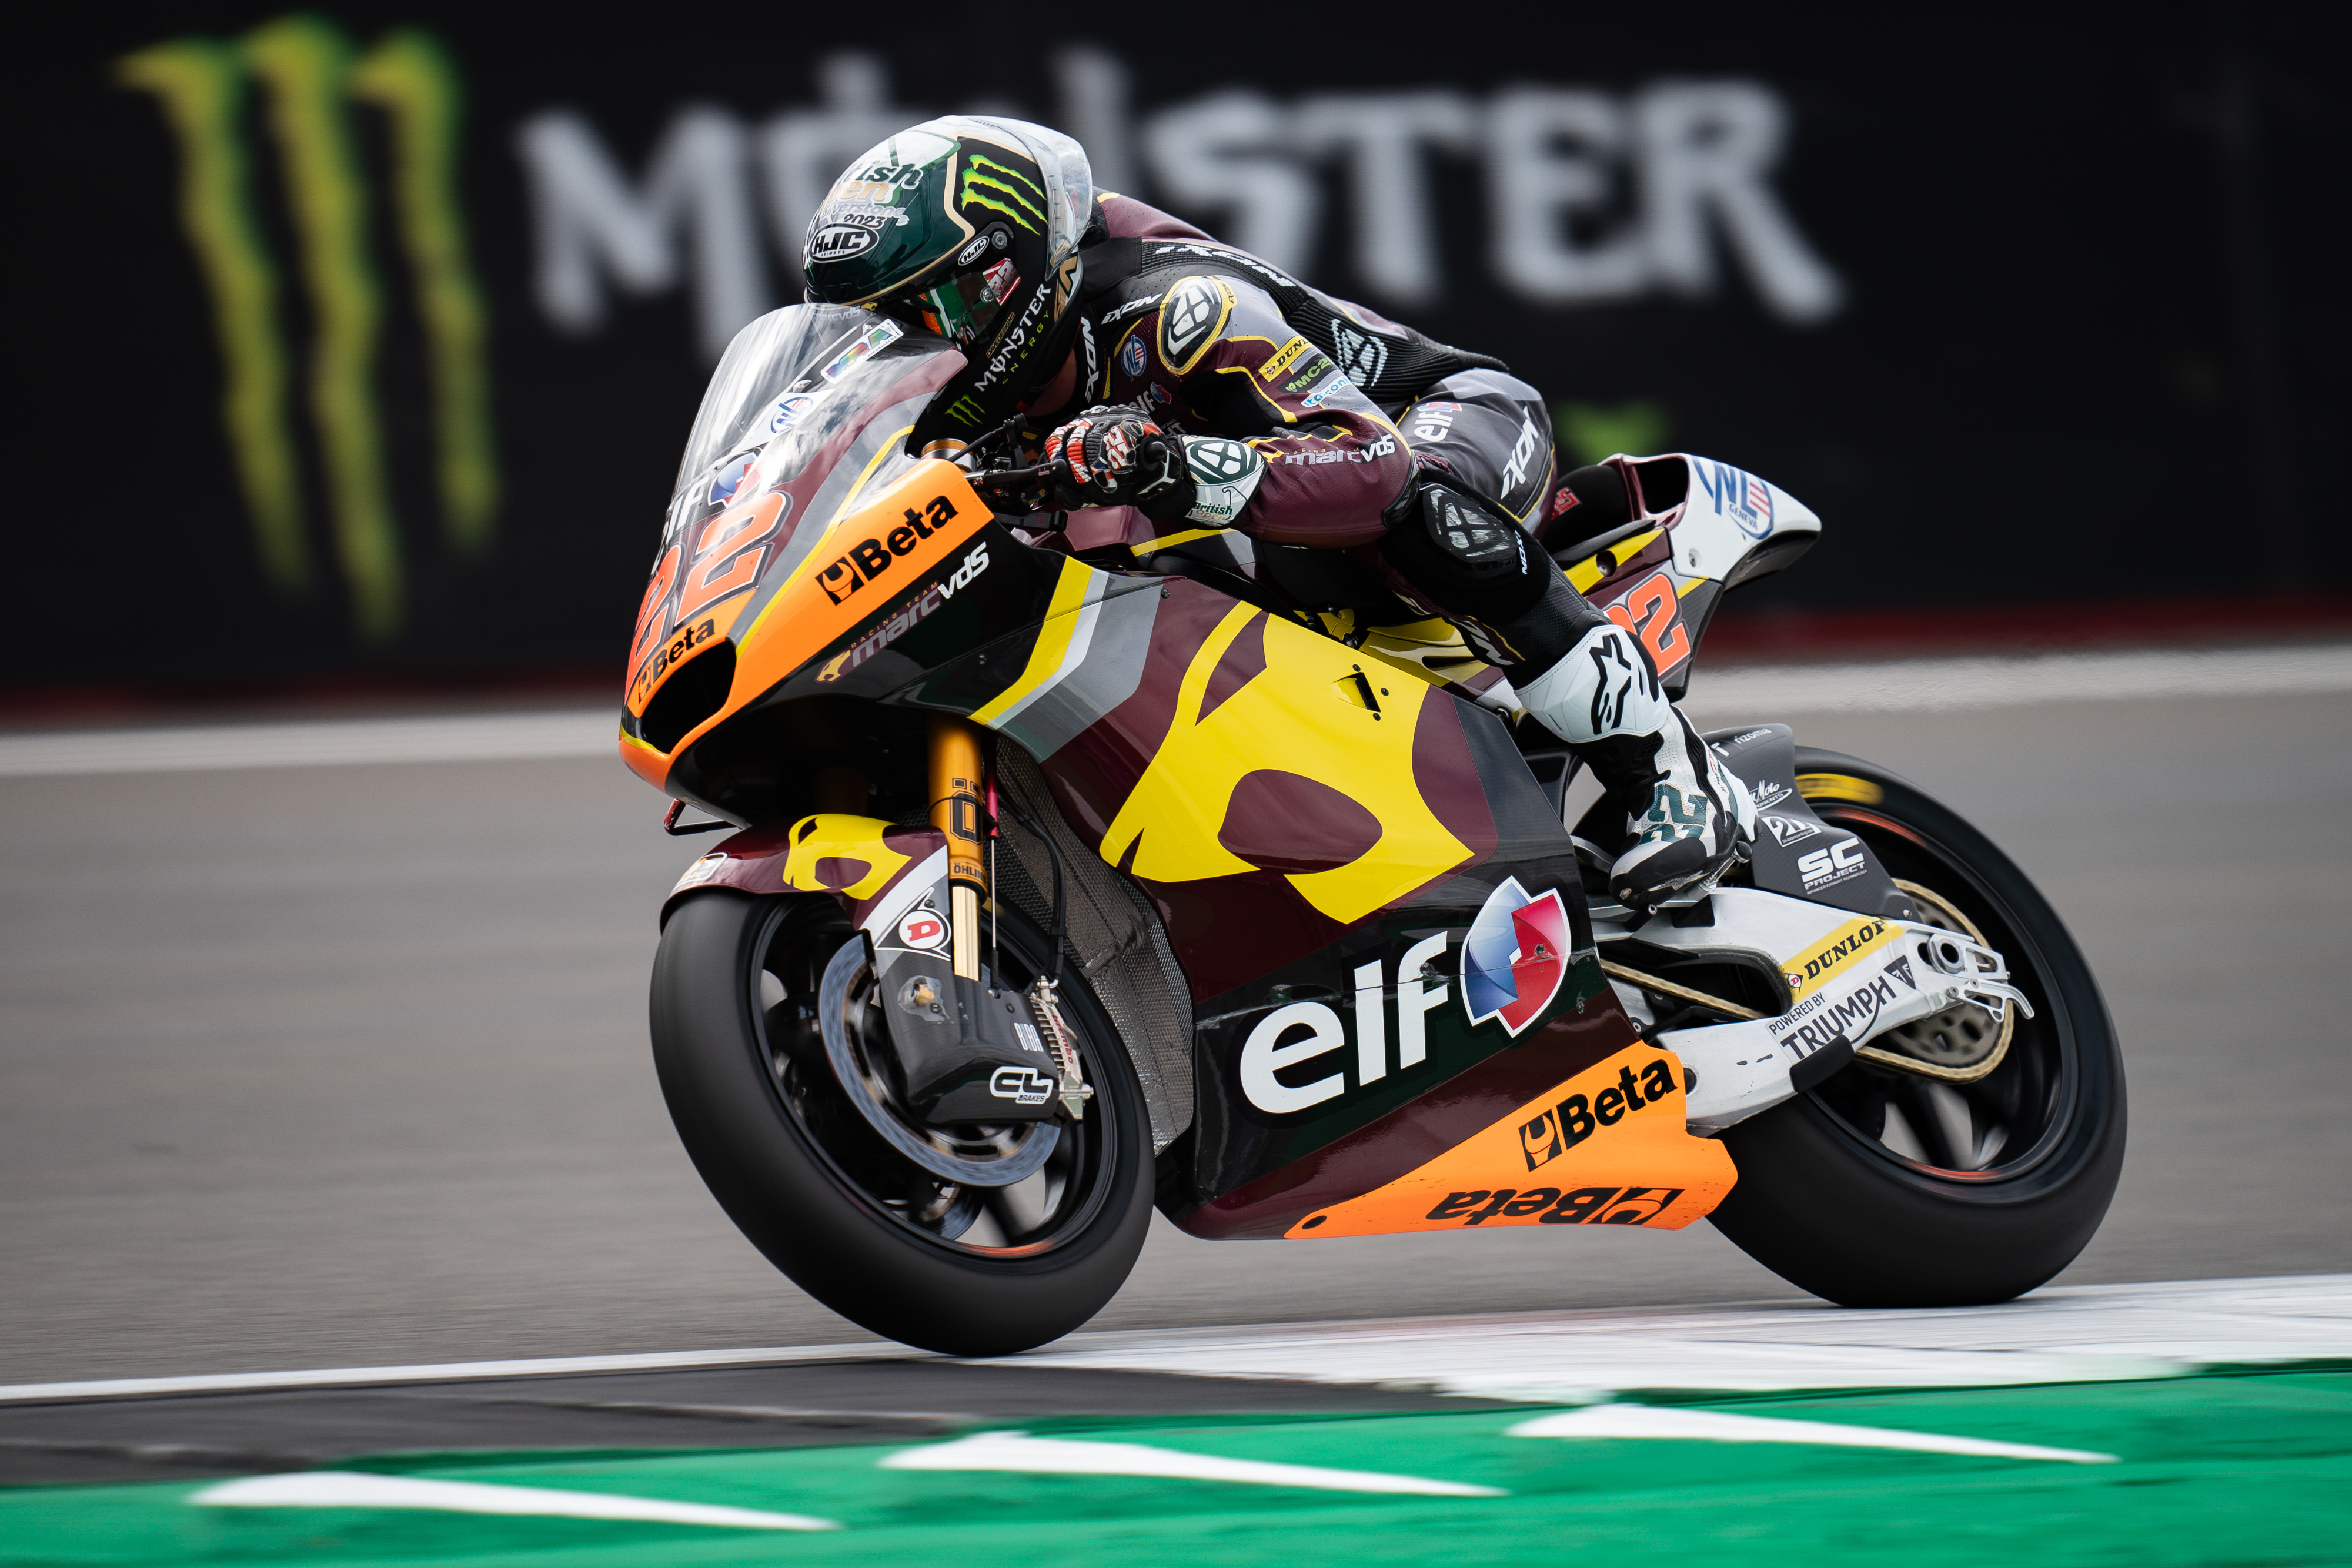 Lowes launches heroic fightback at final home GP - ELF Marc VDS Racing Team